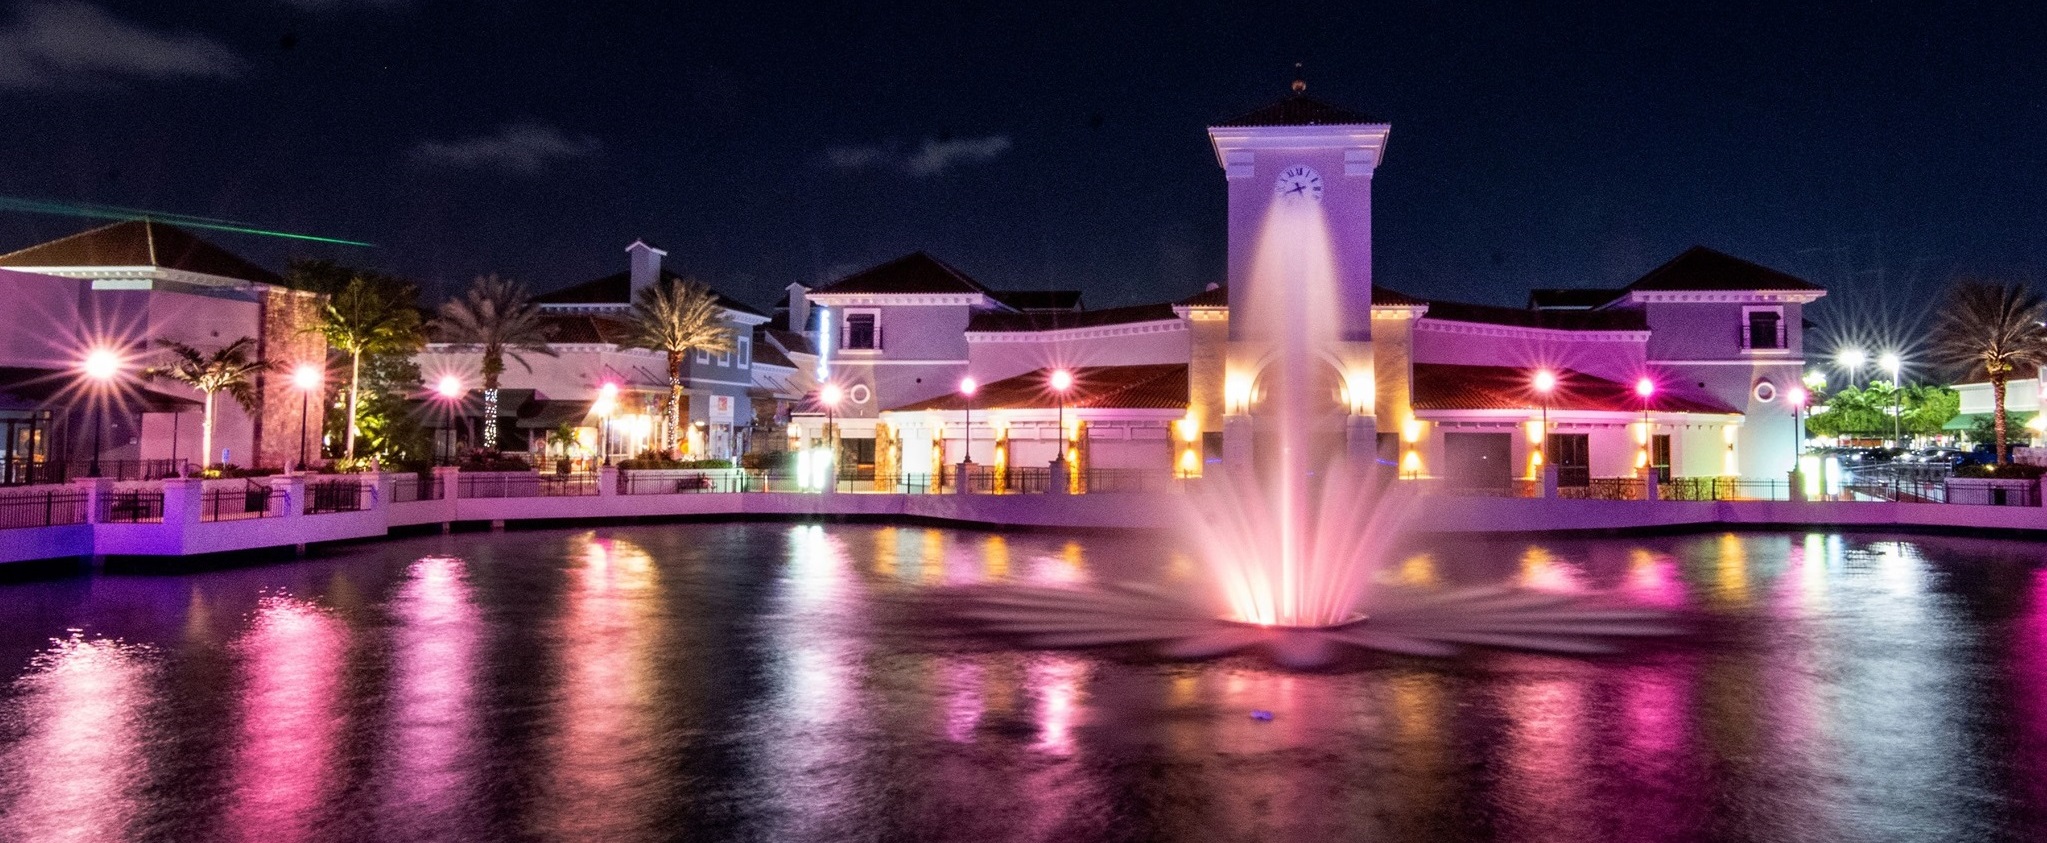 The Town and Country fountain lighted in pink for breast cancer awareness month by solcar electric, inc.